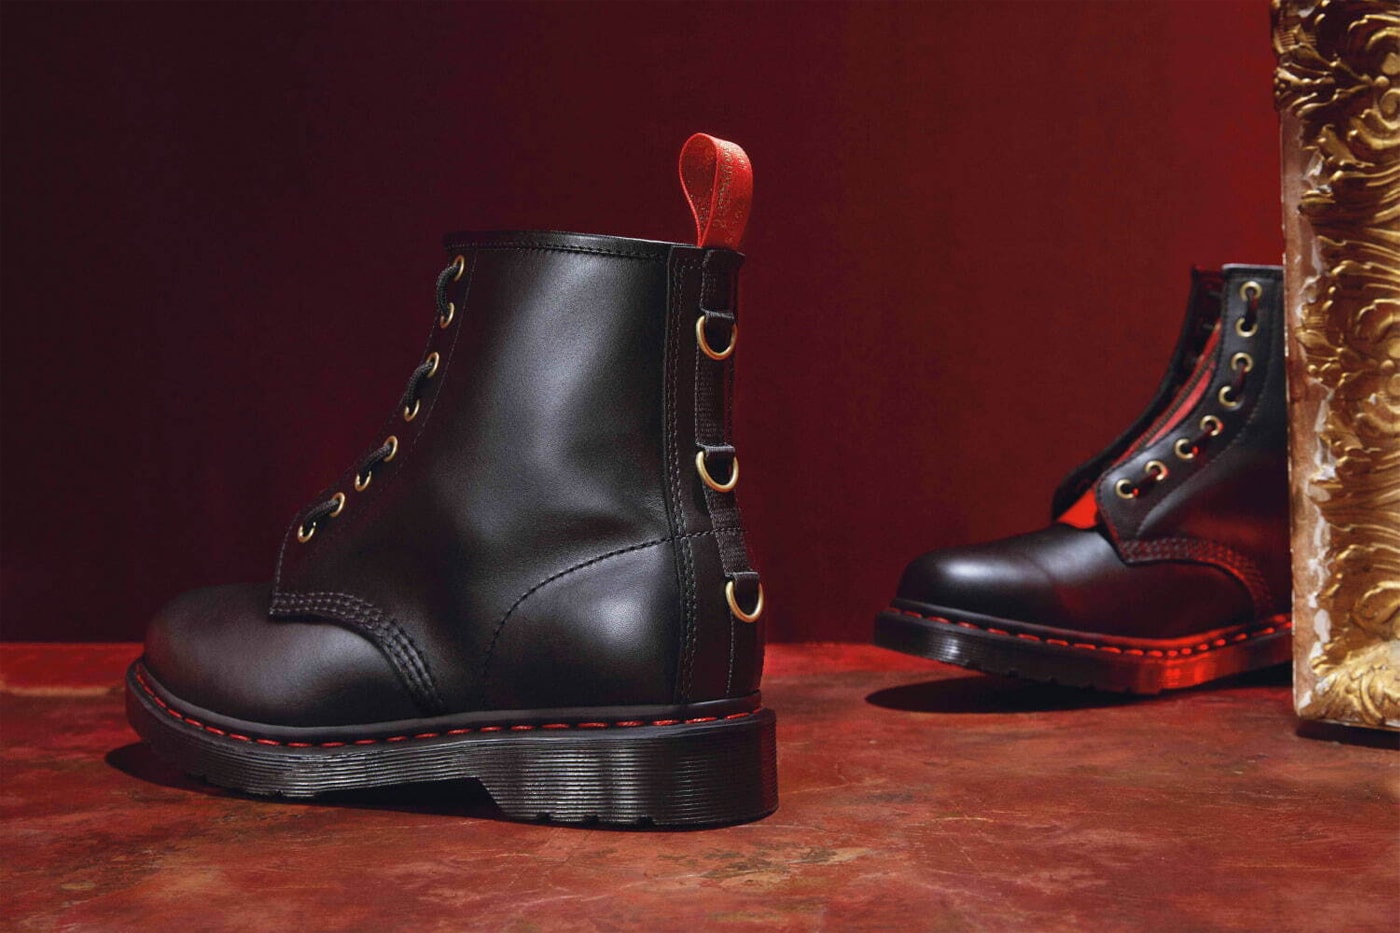 Dr Martens year of the rabbit lunar new year red black 1461 1460 boots release info date price